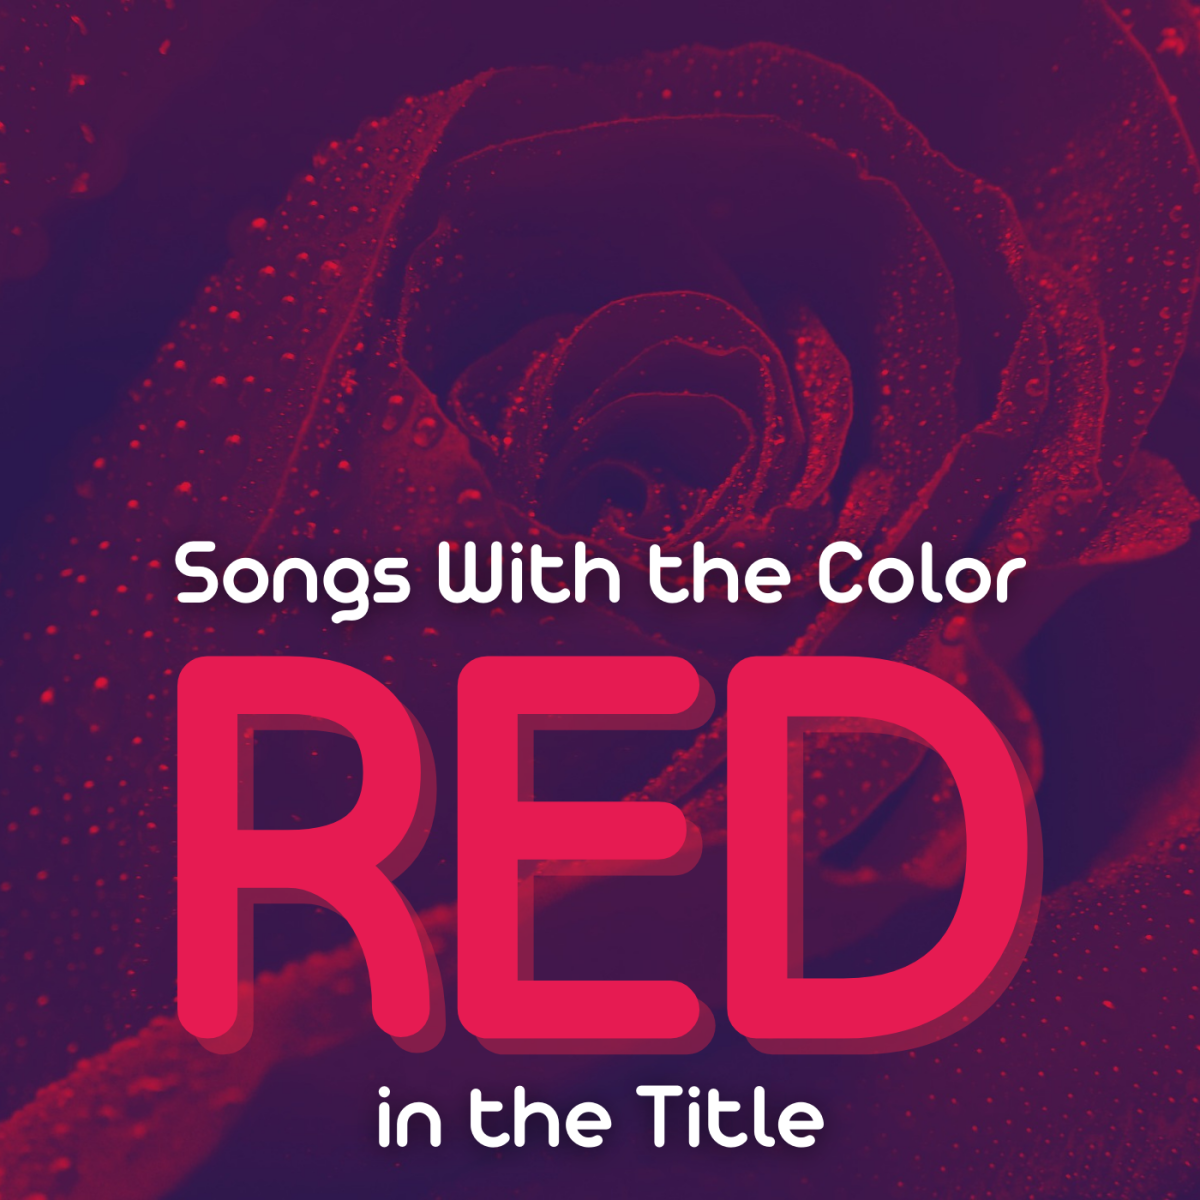 69 Popular Songs With the Color Red in the Title